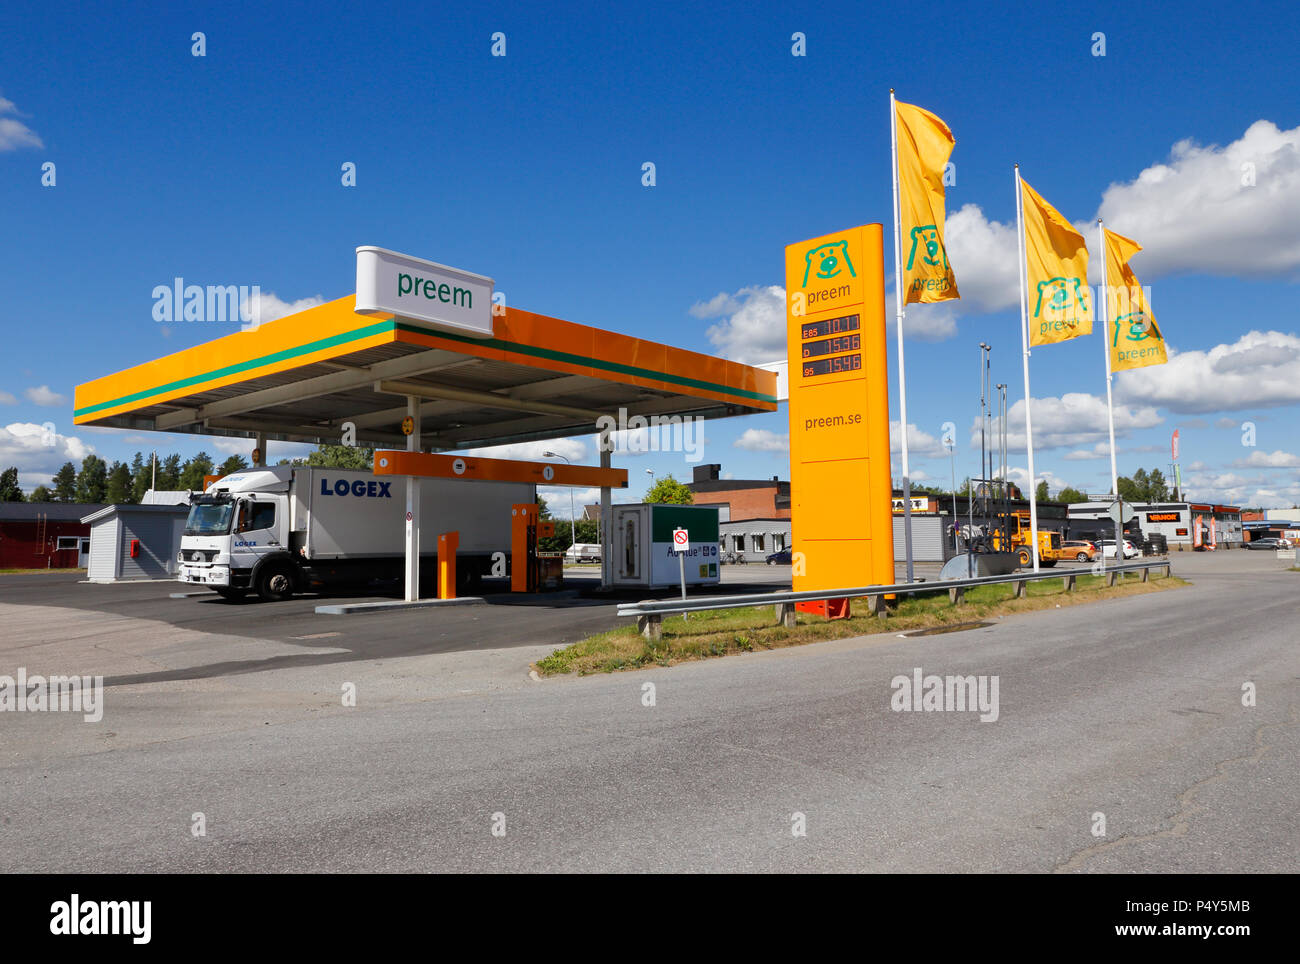 Skelleftea, Sweden - June 21, 2018: Preem brand gasoline service station along the high-way road number E4 with one diesel driven truck refuiling. Stock Photo